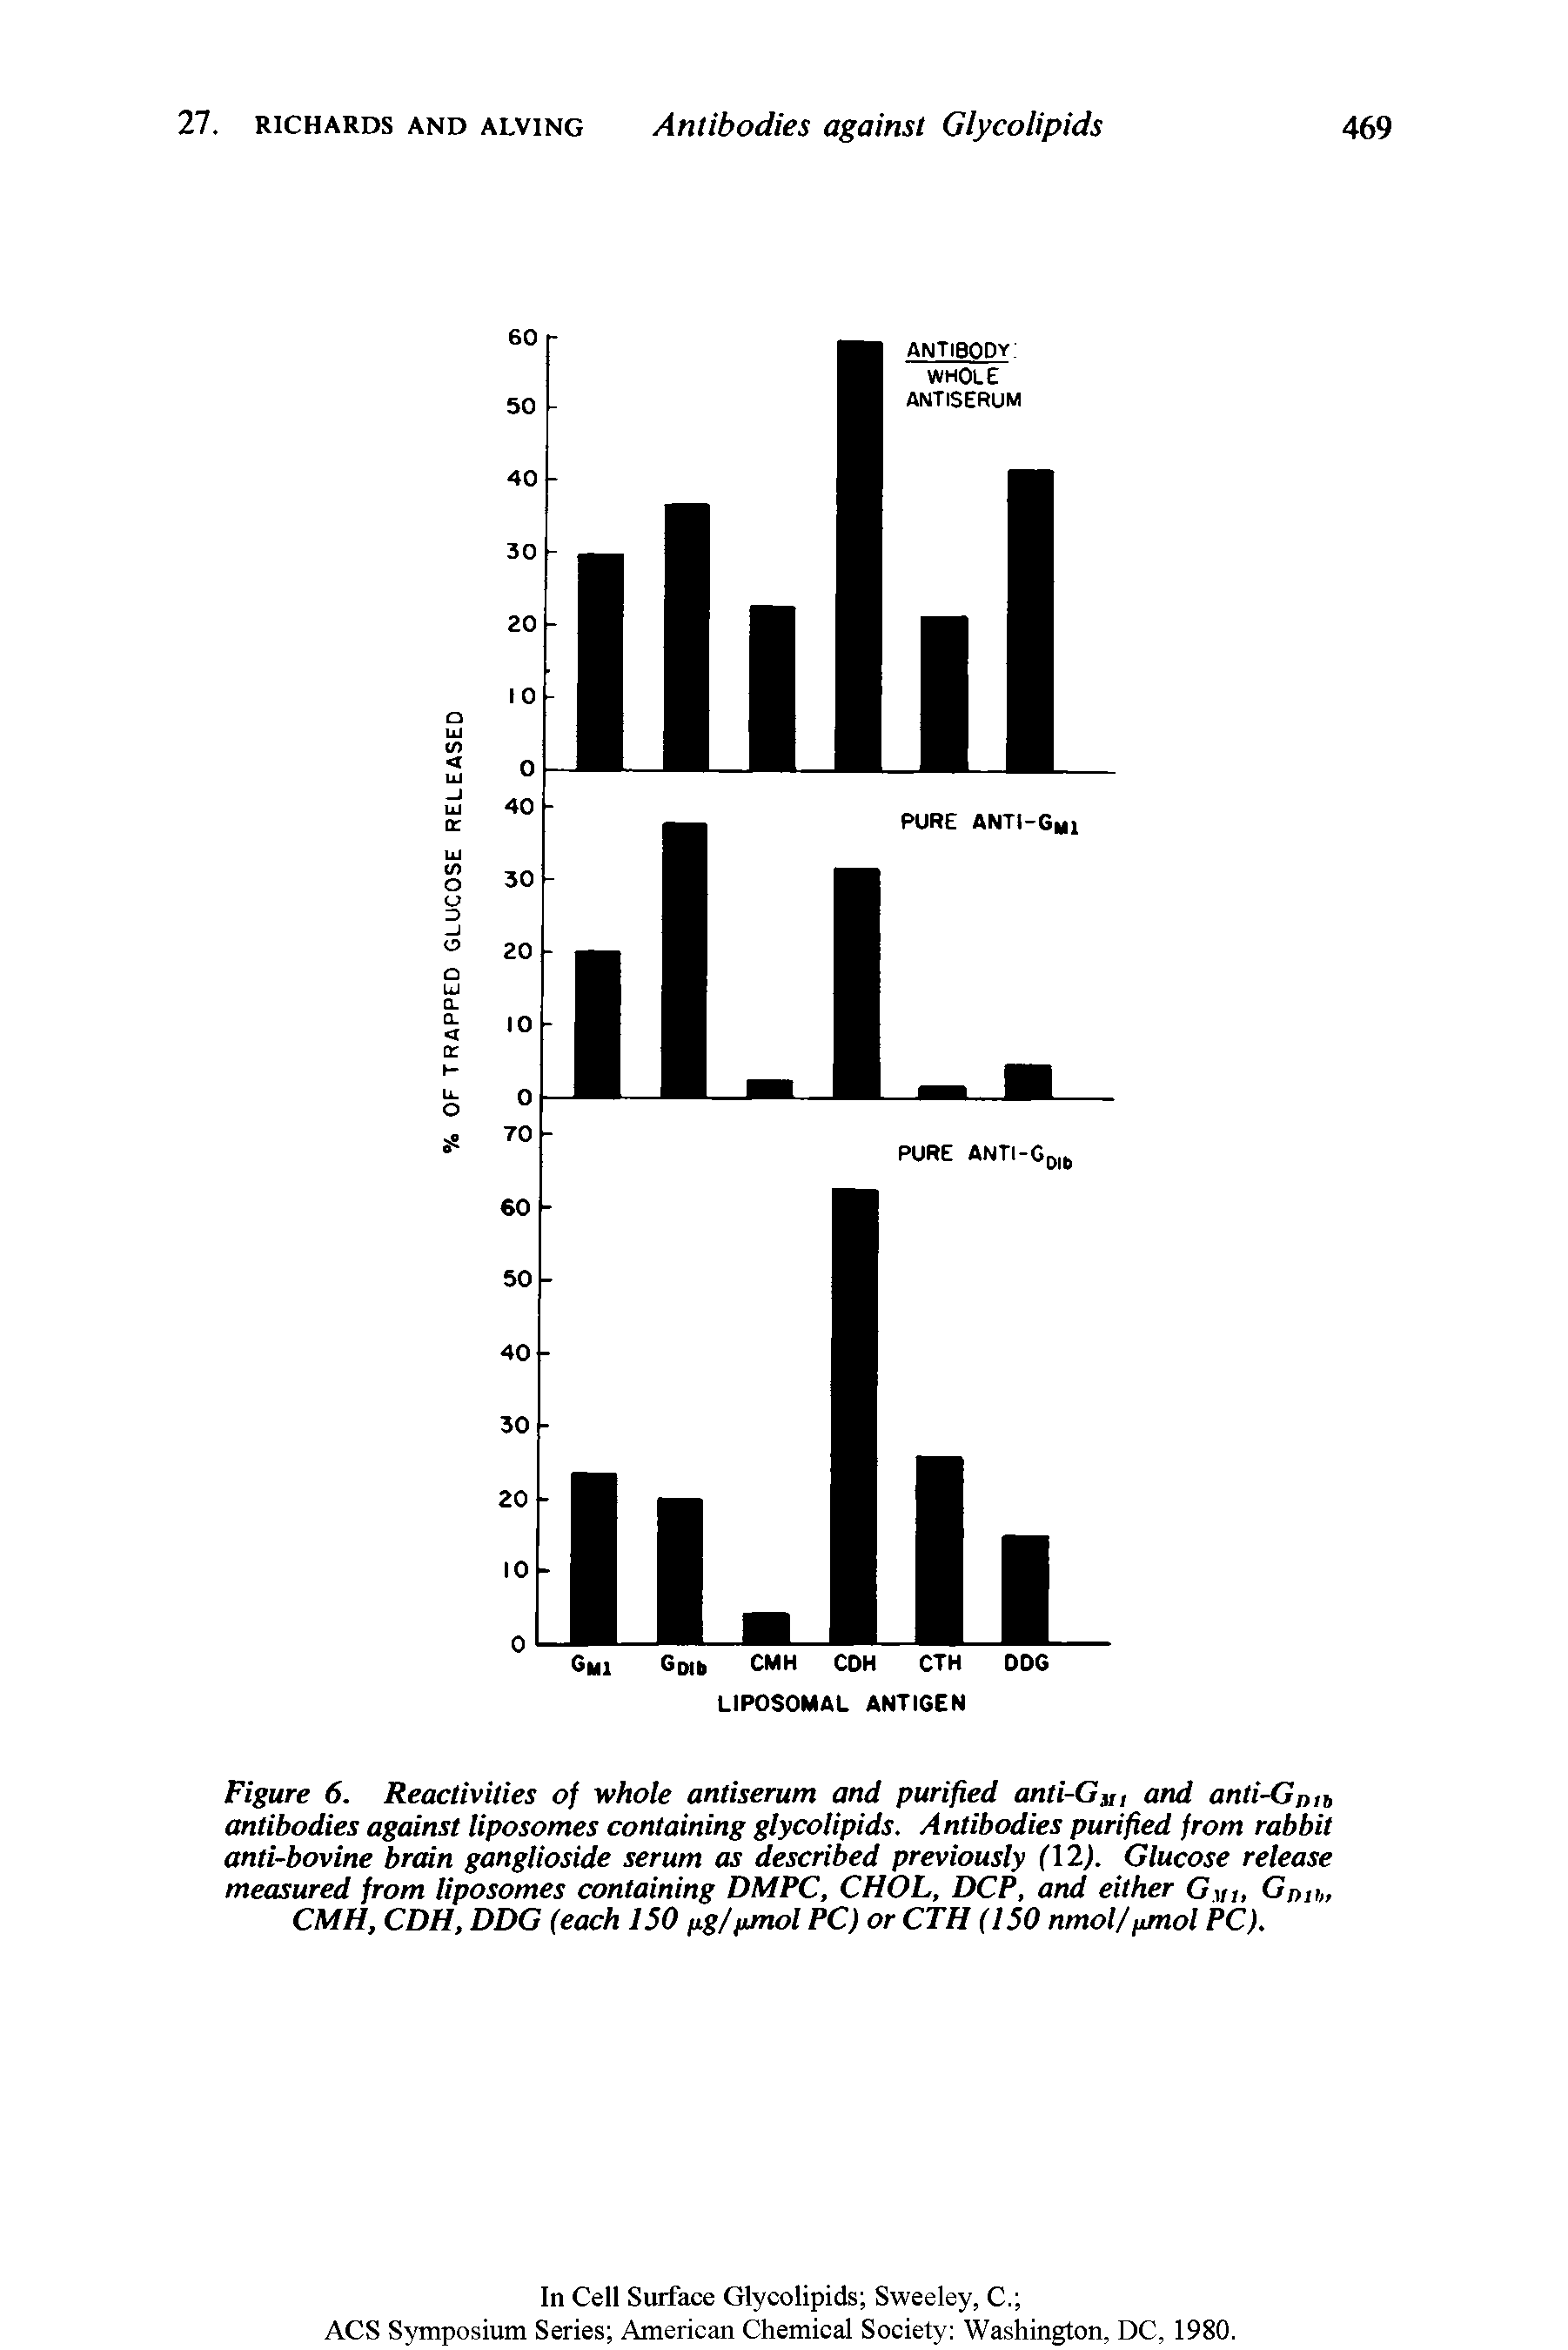 Figure 6. Reactivities of whole antiserum and purified anti-Gll and anti-Gn,b antibodies against liposomes containing glycolipids. Antibodies purified from rabbit anti-bovine brain ganglioside serum as described previously (12). Glucose release measured from liposomes containing DMPC, CHOL, DCP, and either Cm, Gpn CMH, CDH, DDG (each 150 p.g/ymol PC) or CTH (150 nmol/pmol PC).